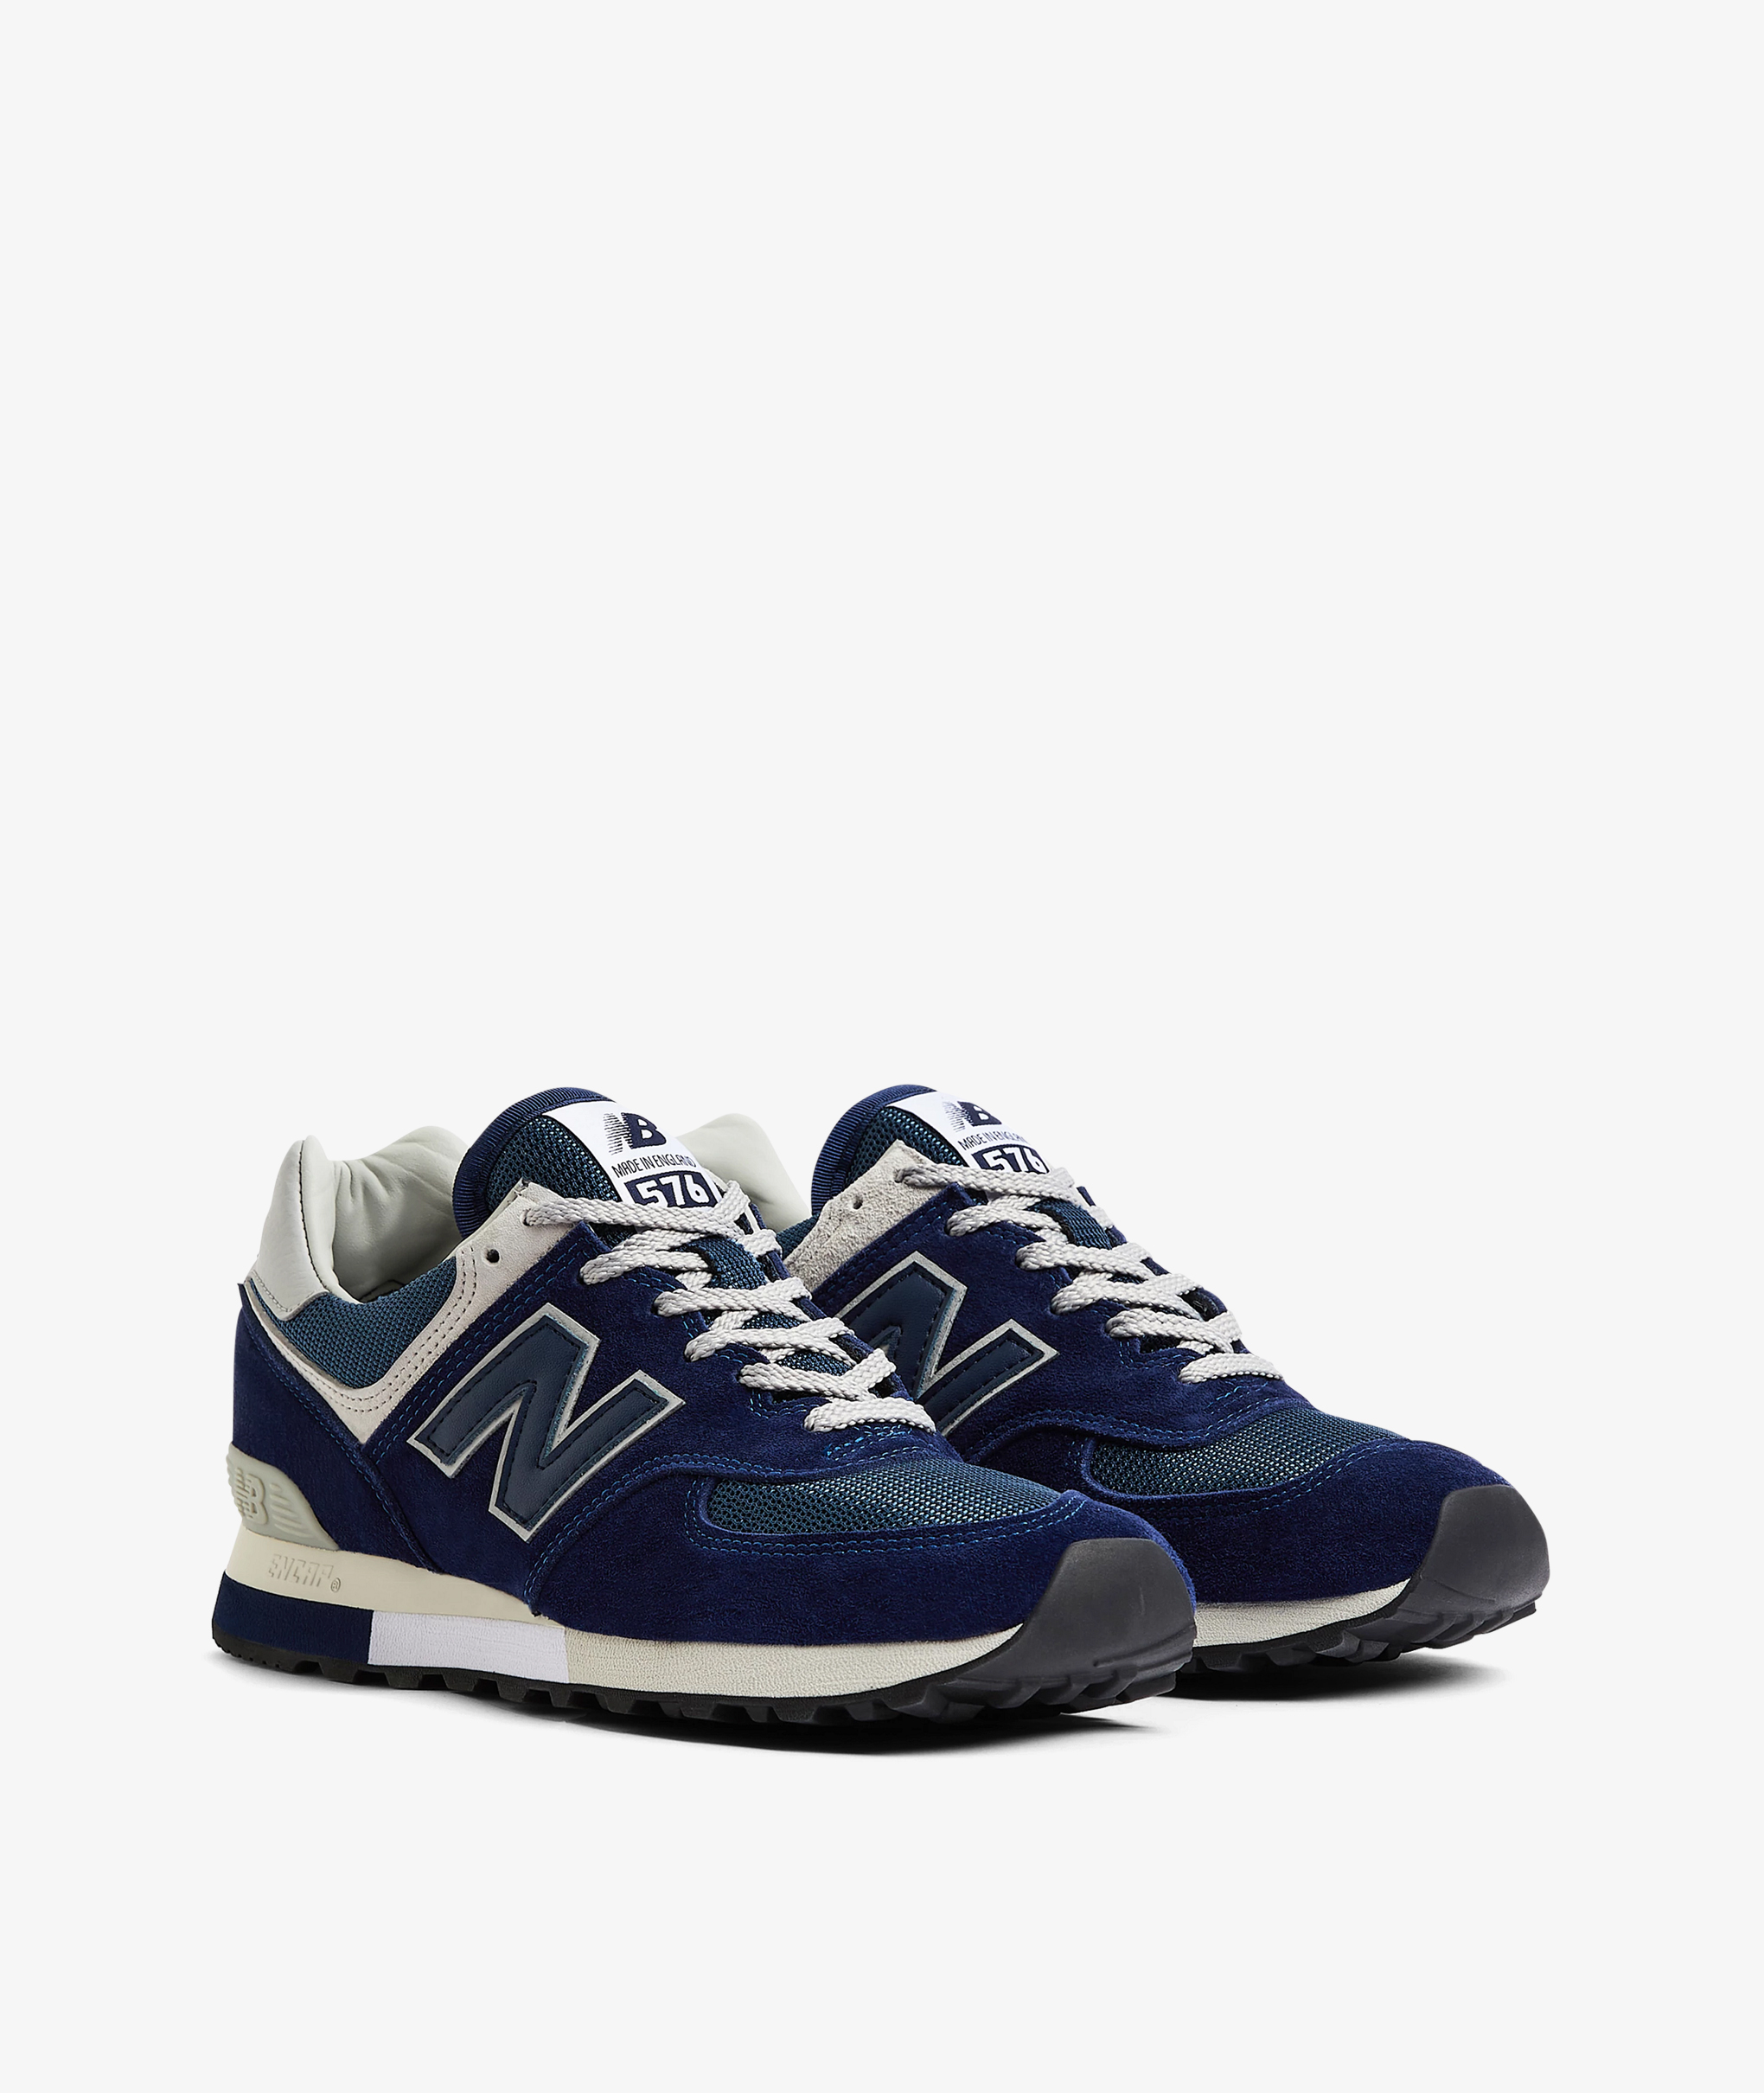 Norse Store | Shipping Worldwide - New Balance OU576ANN - MEDIEVAL BLUE ...